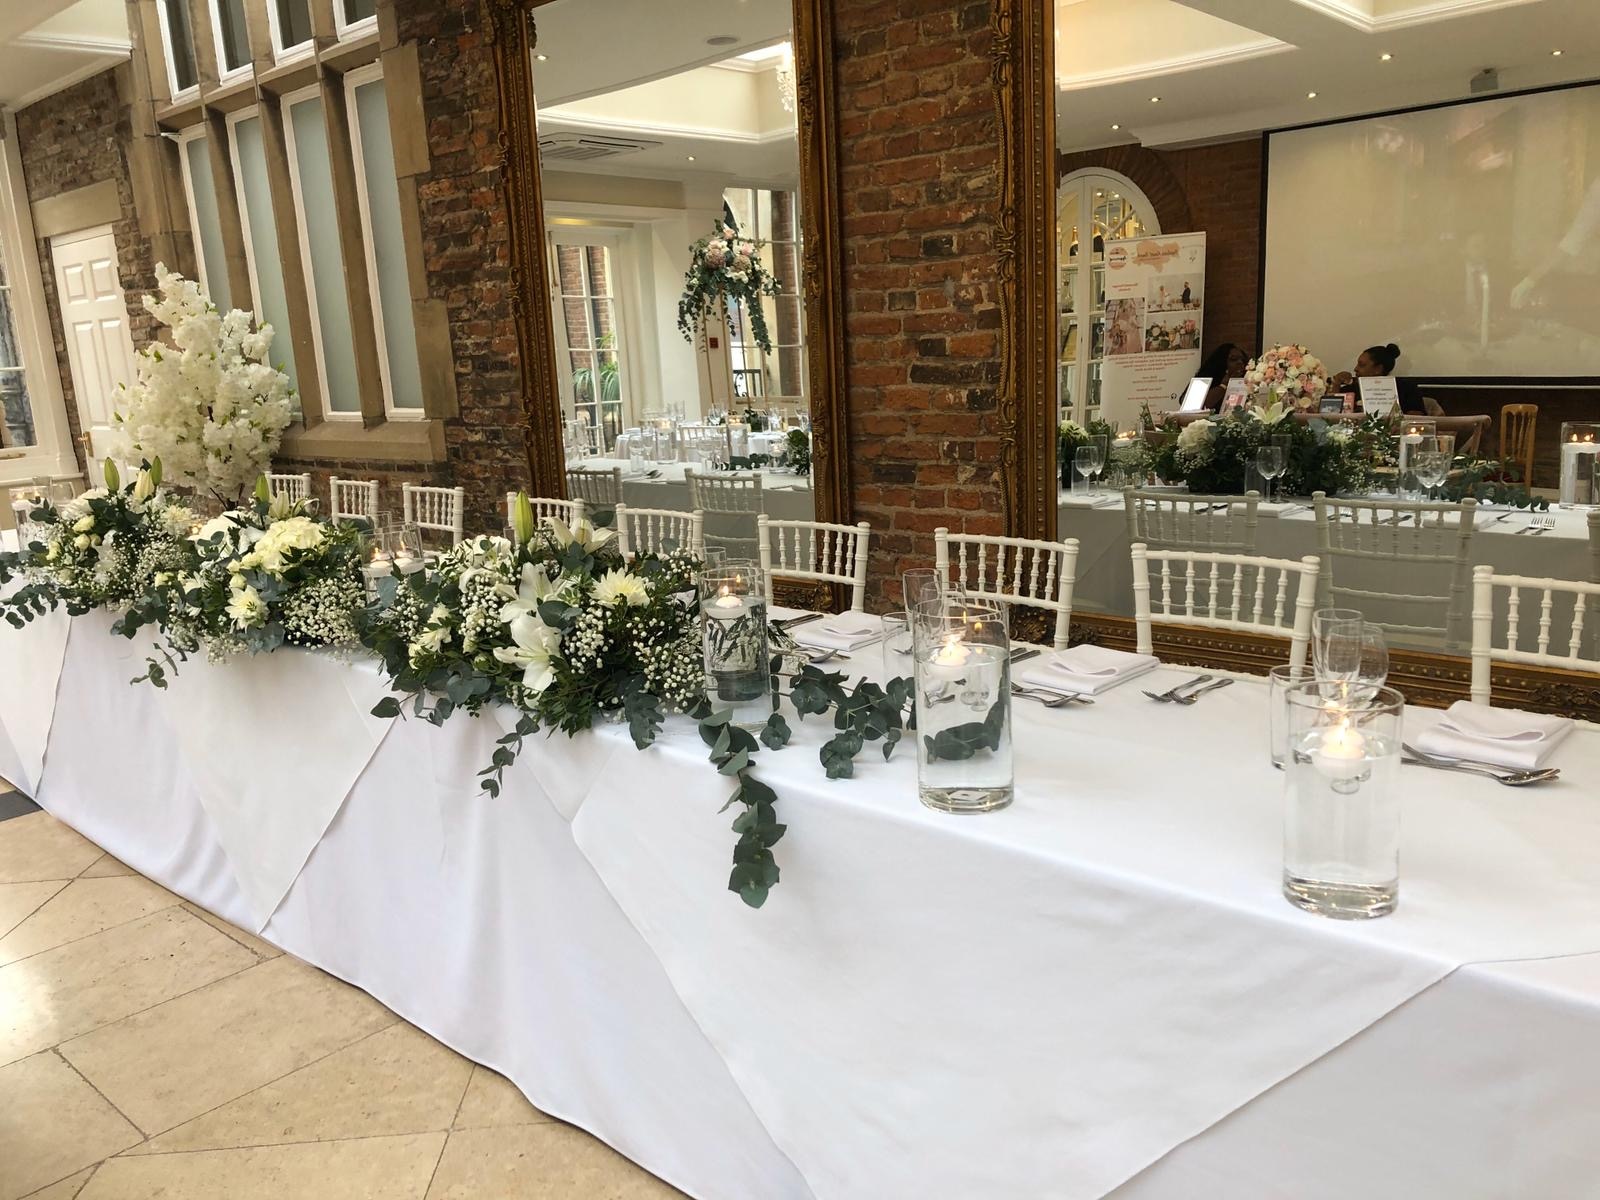 a long table with white flowers and greenery.